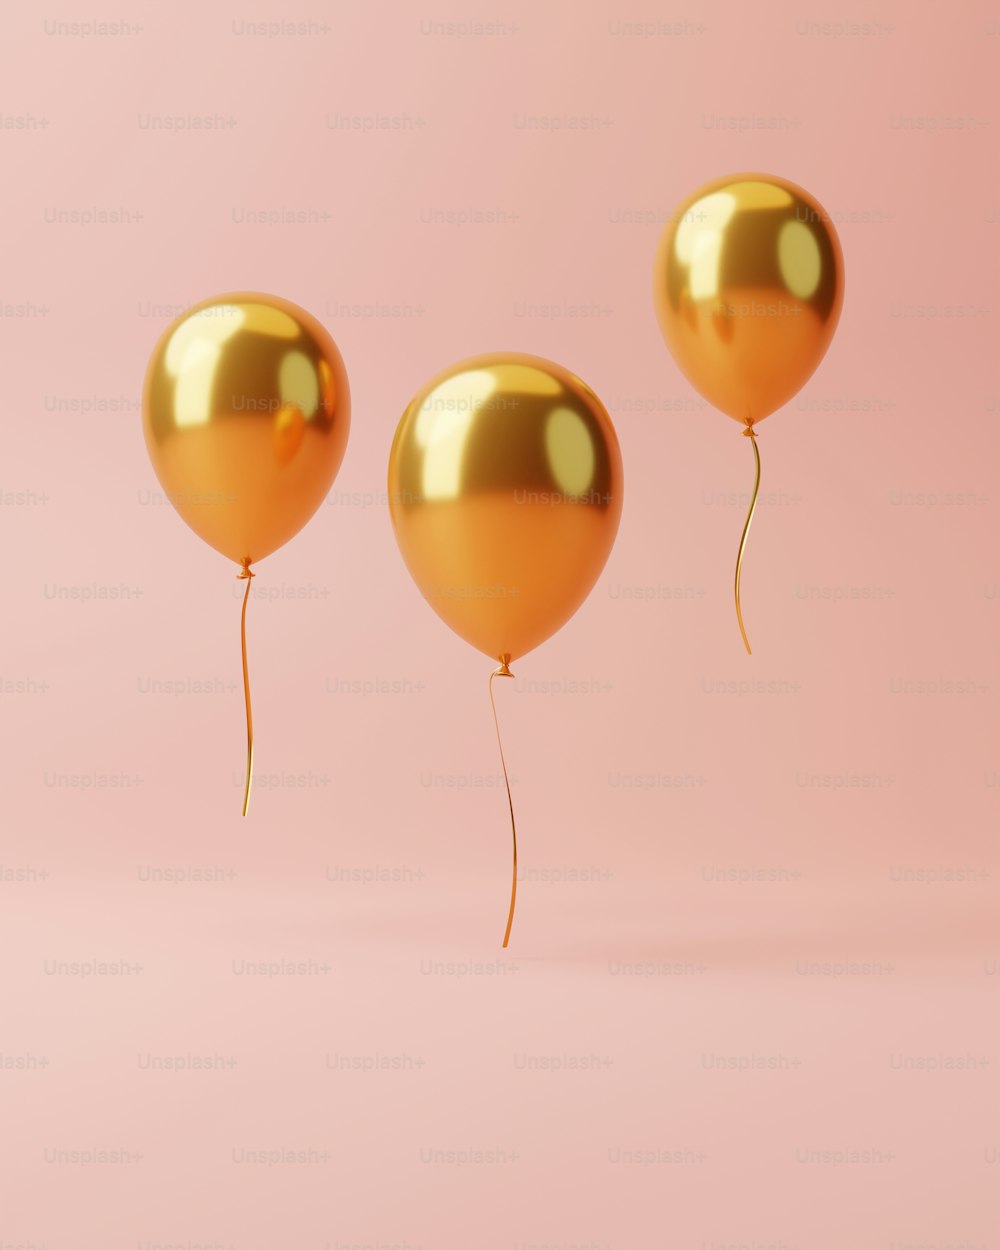 three gold balloons floating in the air